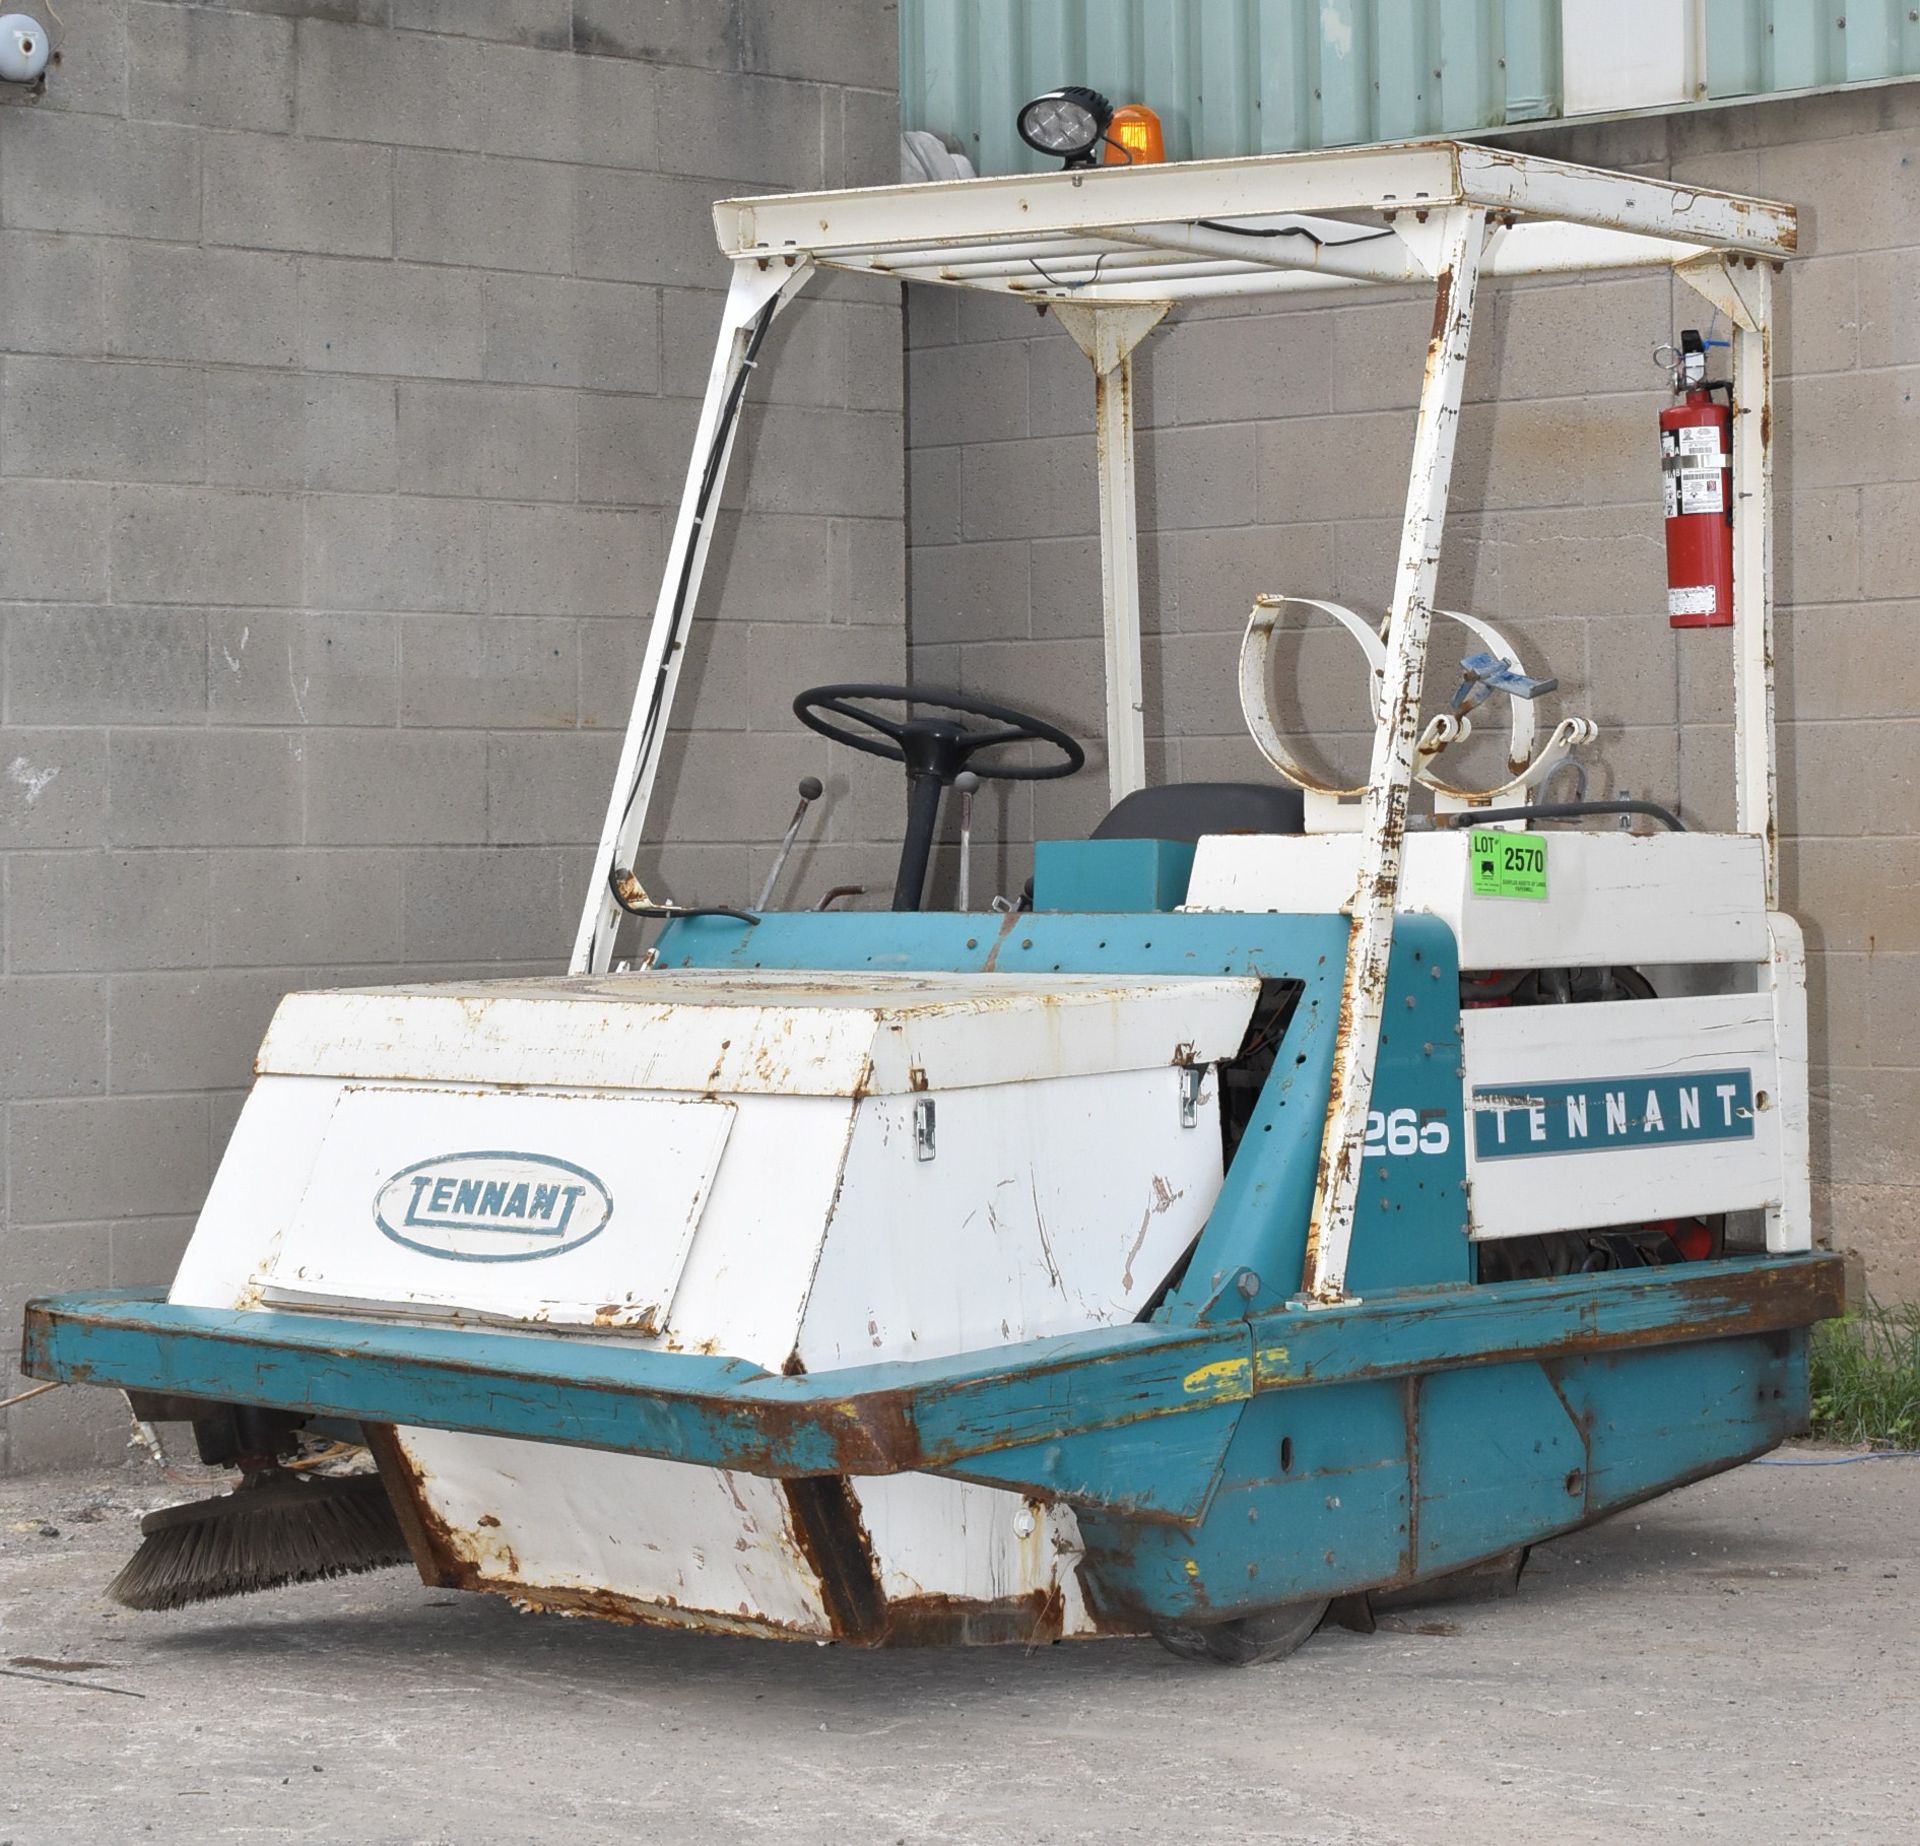 TENNANT 265 RIDE-ON LPG FLOOR SCRUBBER, S/N: 7390(PROPANE TANK NOT INCLUDED) [RIGGING FEE FOR LOT #